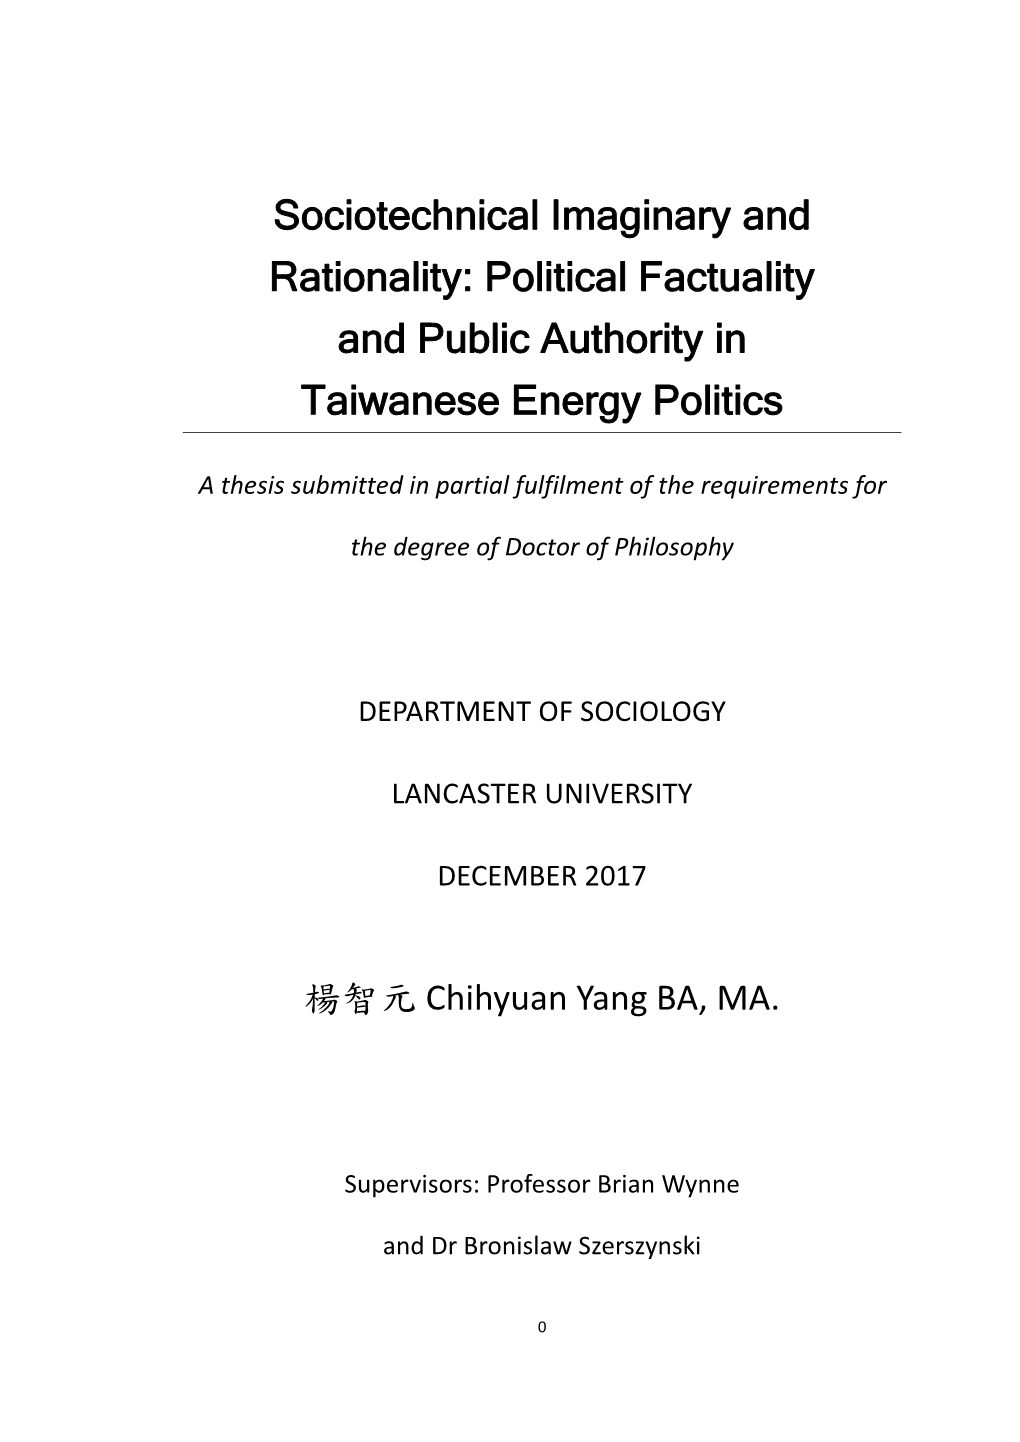 Sociotechnical Imaginary and Rationality: Political Factuality and Public Authority in Taiwanese Energy Politics